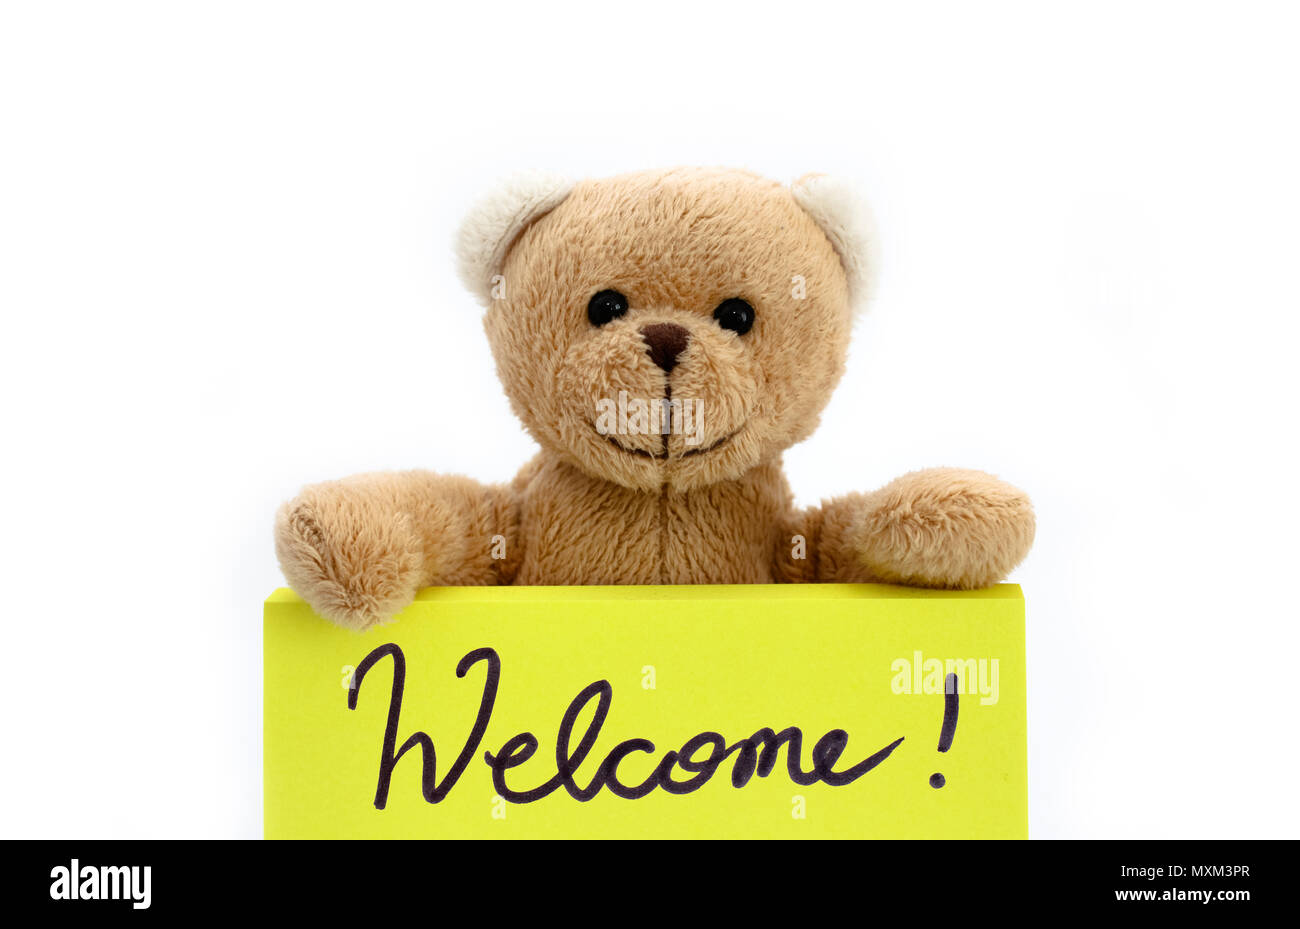 Brown teddy bear holding with the two hands a note in bright yellow color with the handwritten message “Welcome!” as welcome sign concept. Photo isola Stock Photo